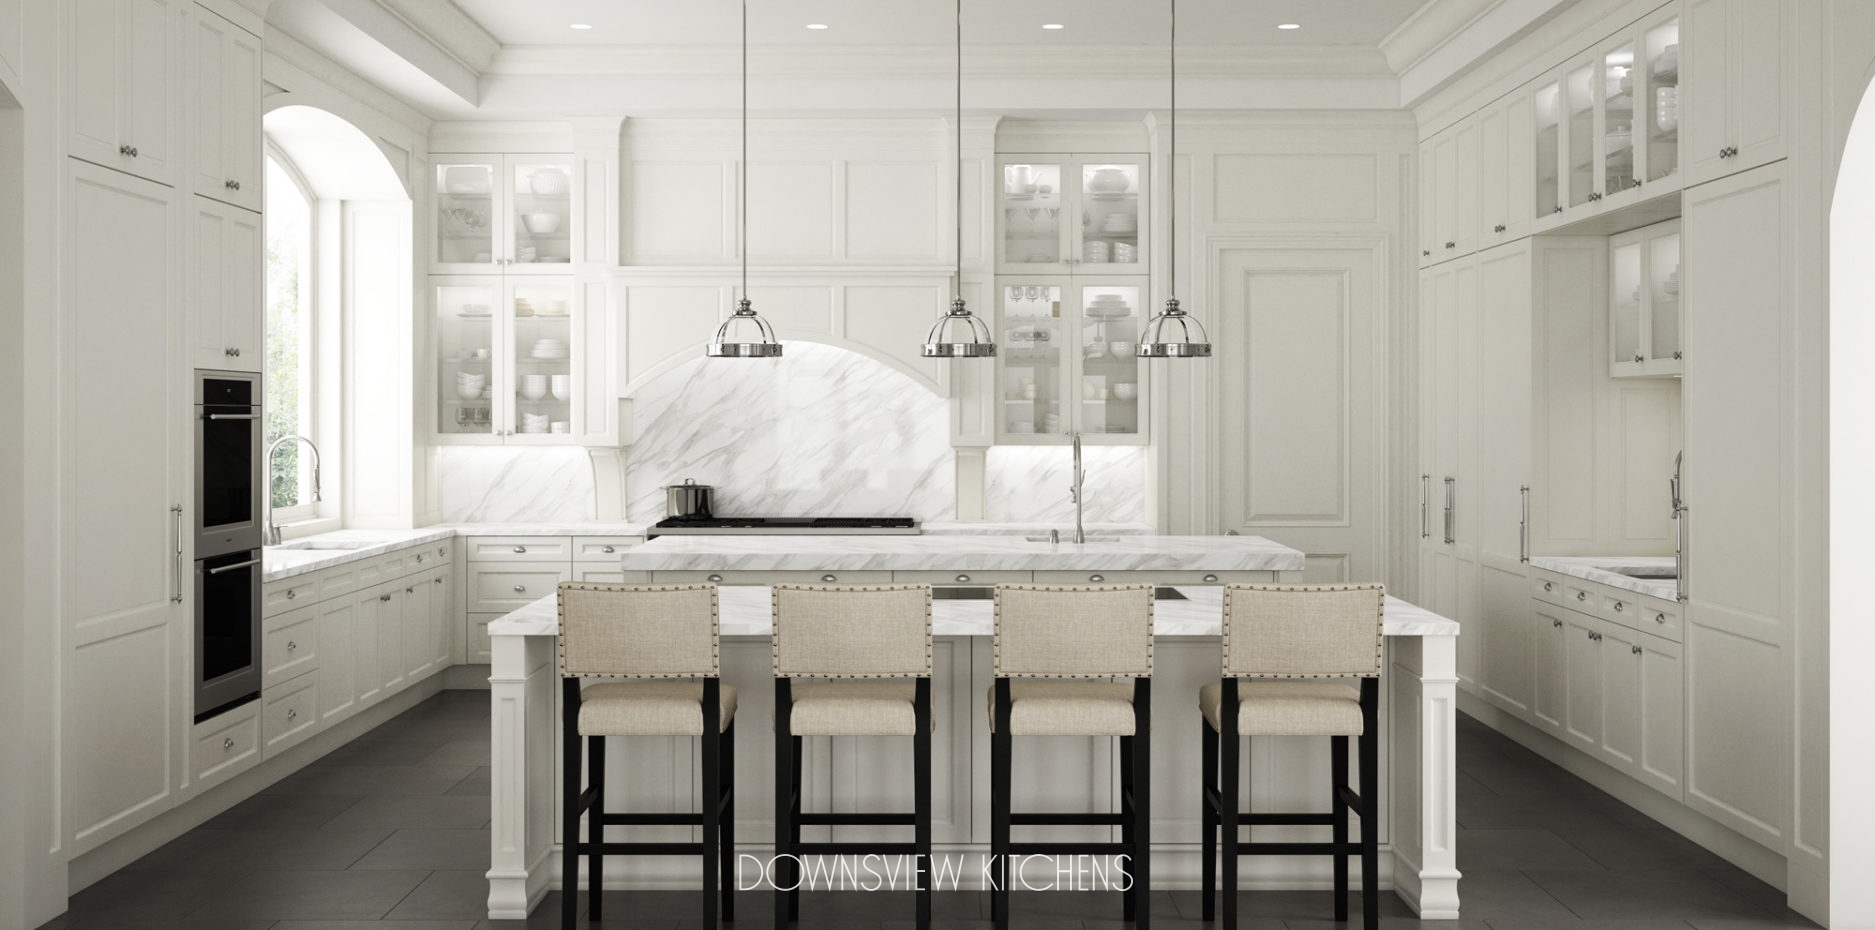 Downsview Kitchens And Fine Custom